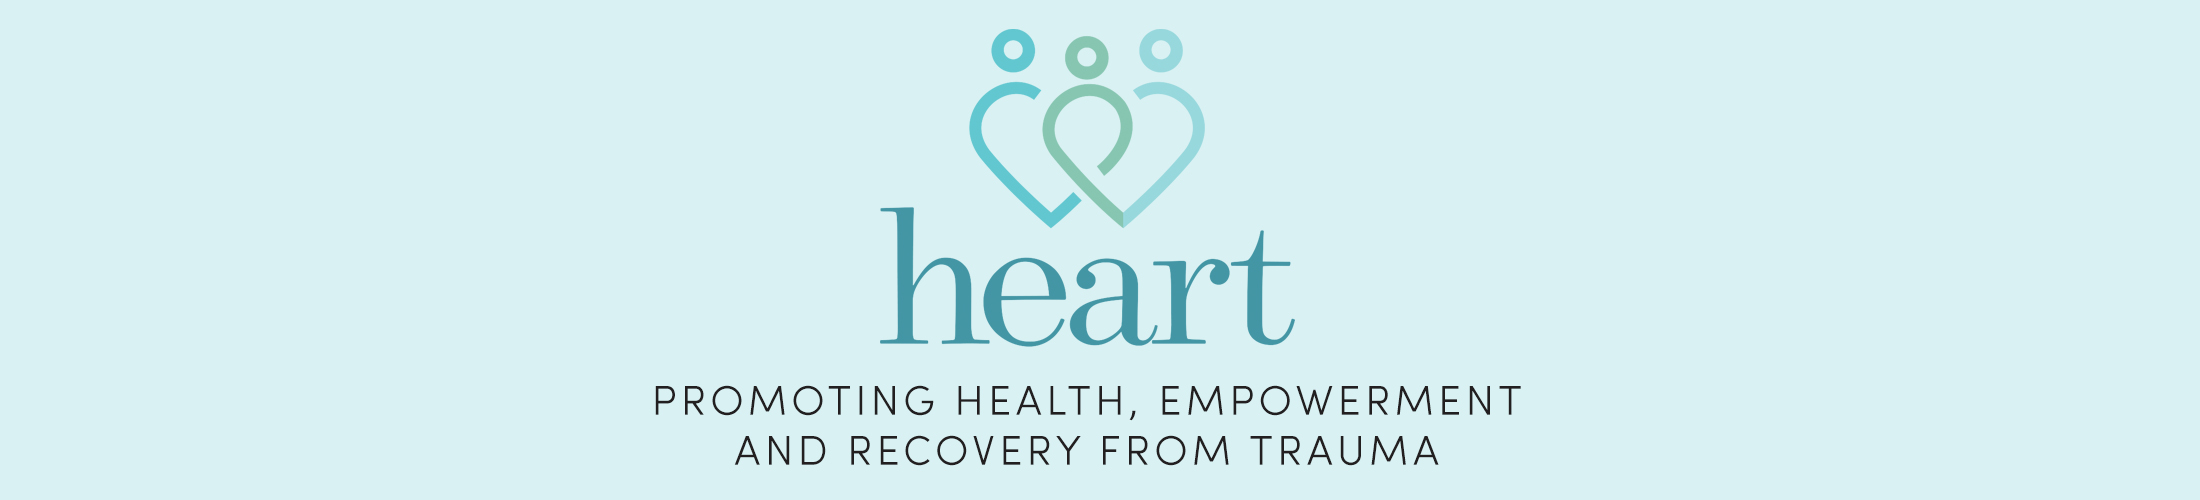 Heart Promoting Health, Empowerment and Recovery from Trauma